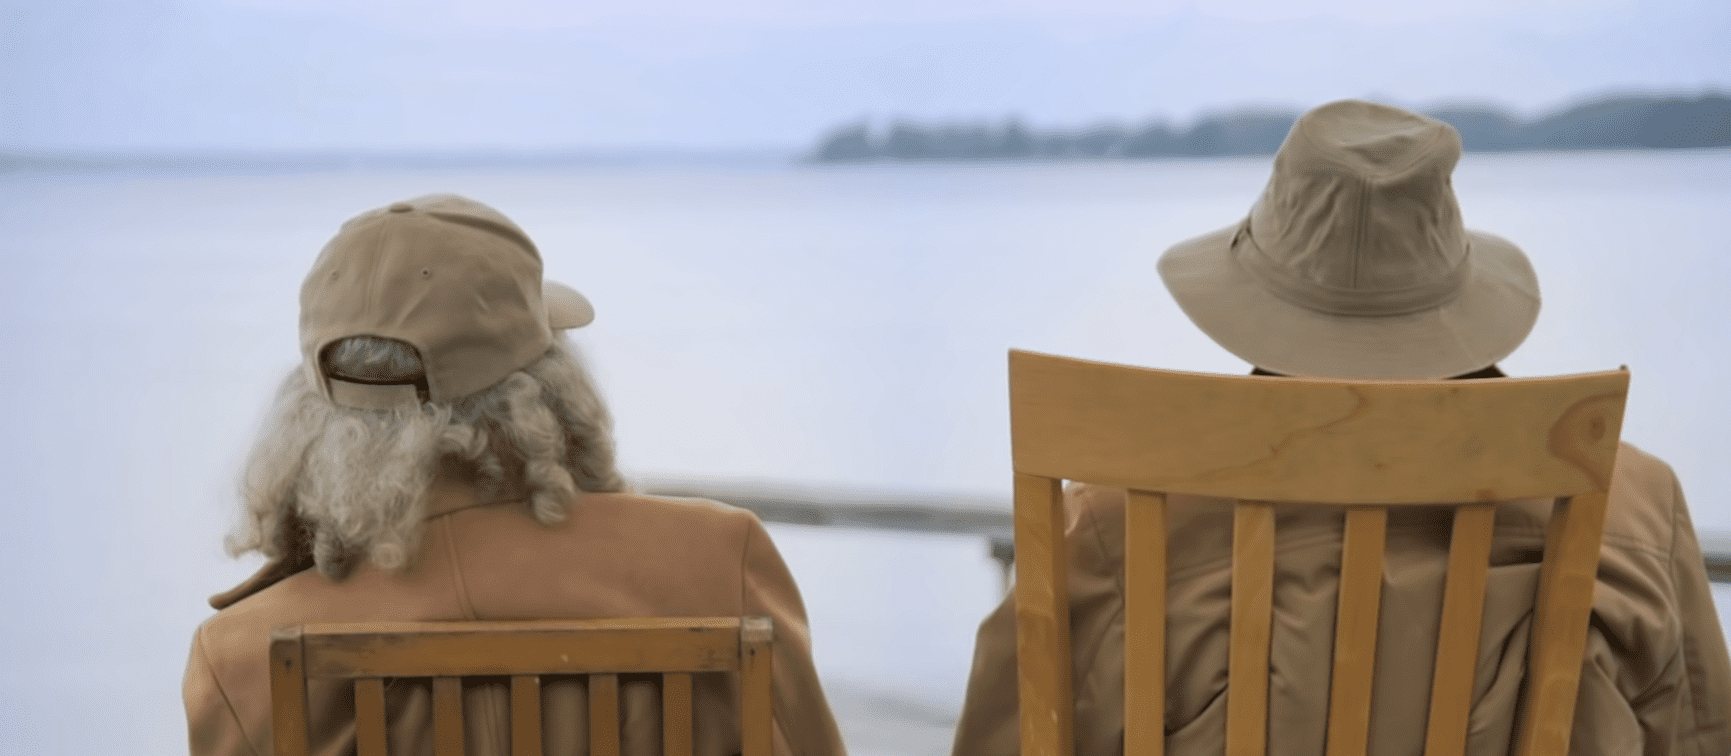 Eddie Harrison and his wife Edith Hill watching birds at the river together. │Source: youtube.com/Topic